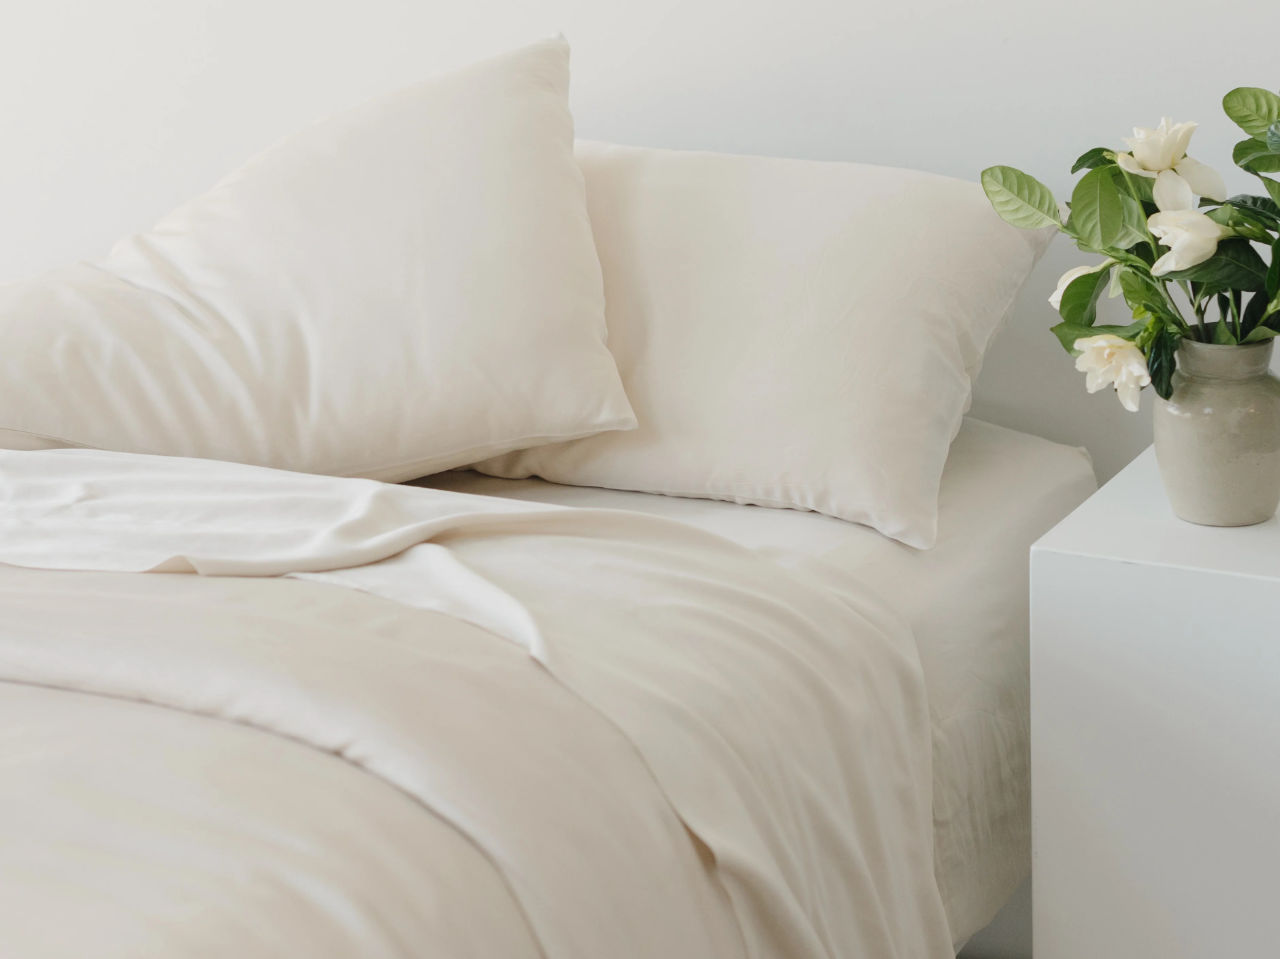 Bed with off-white sheets next to plant